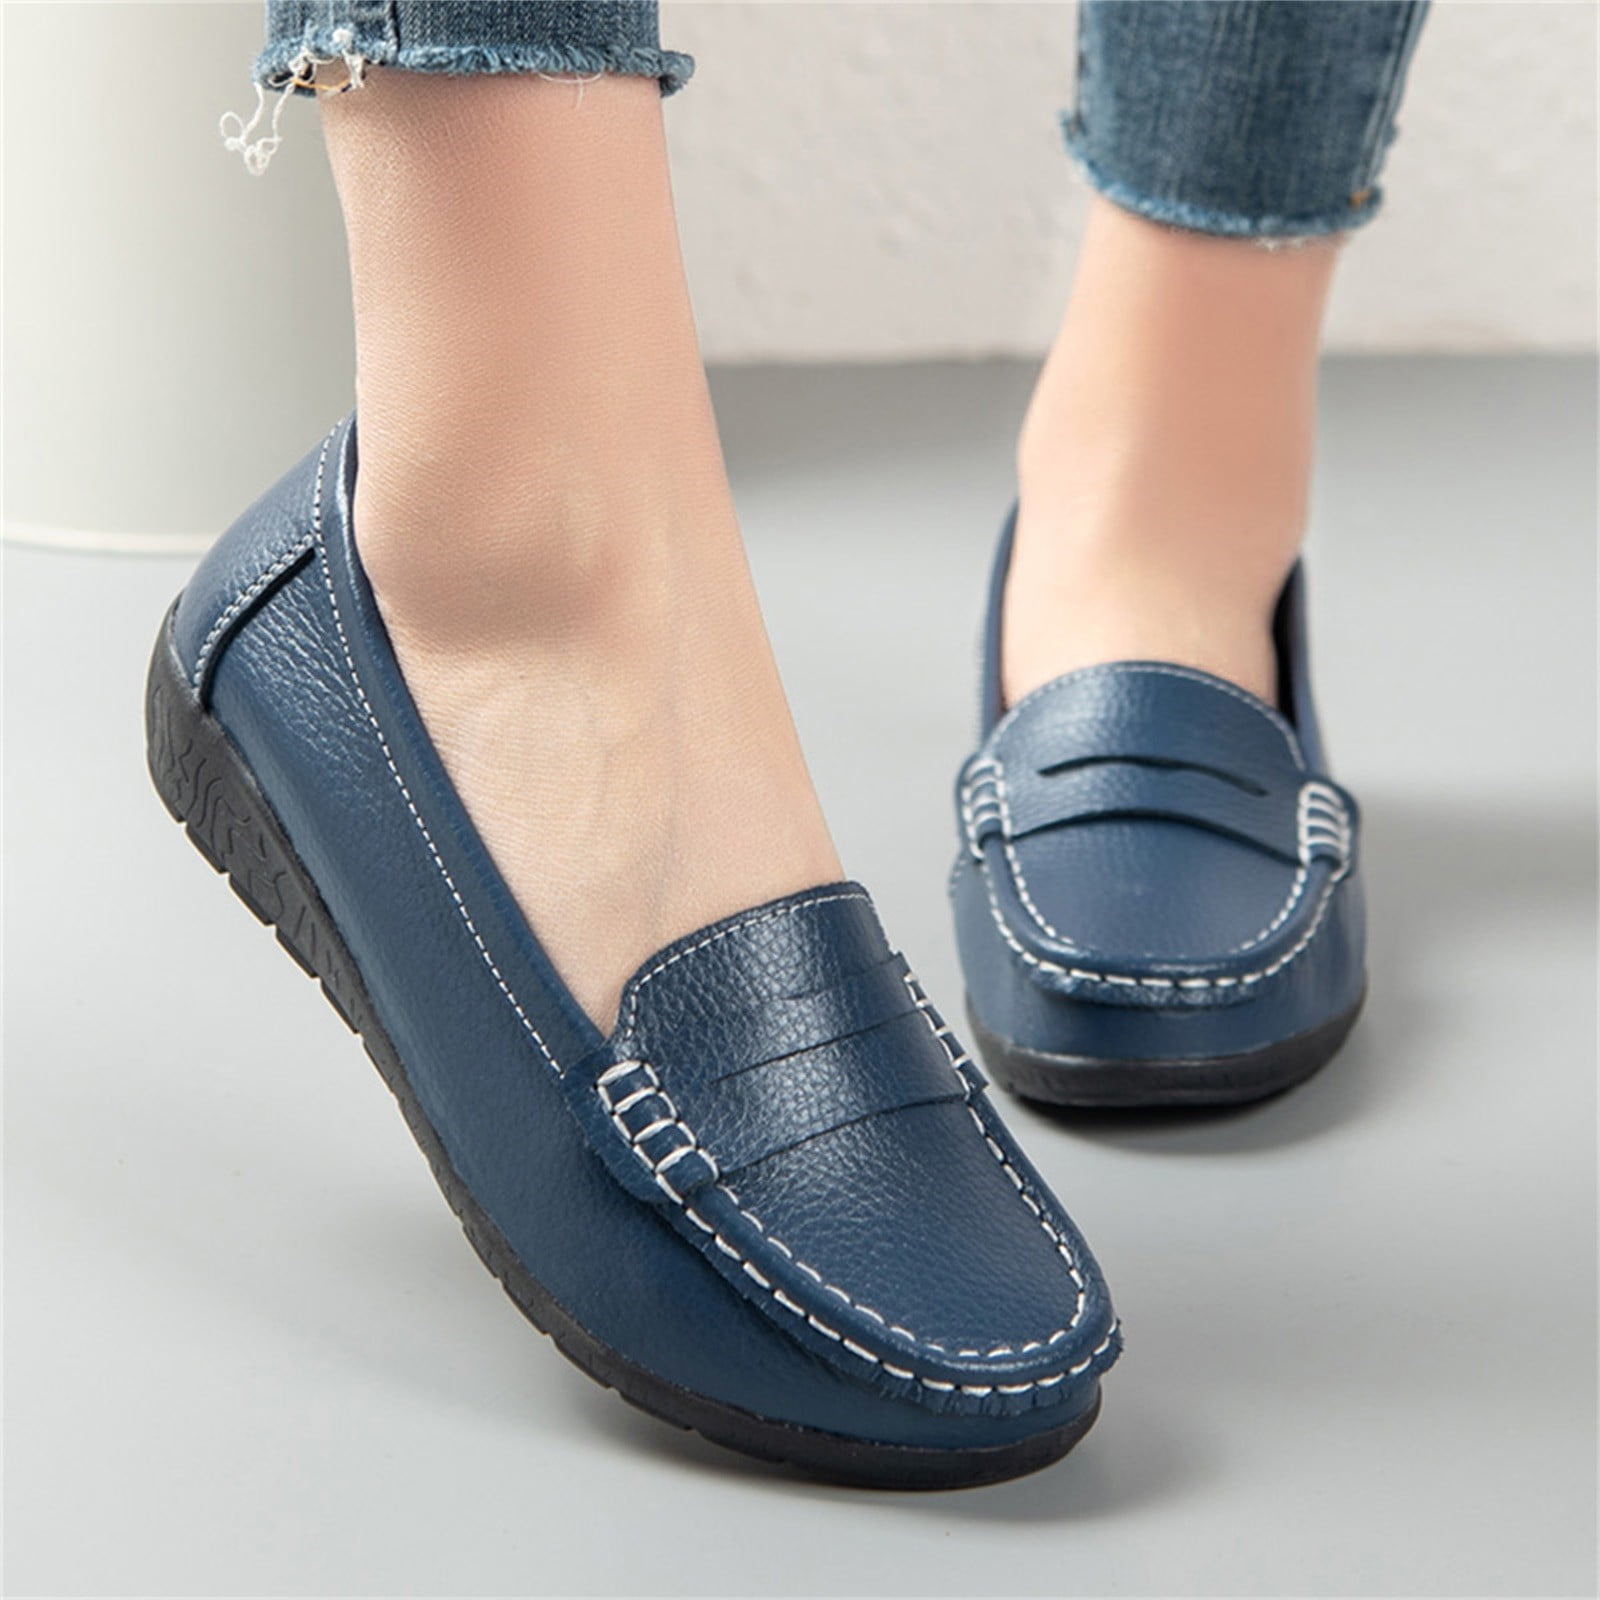 uikmnh Women Casual Shoes Flat Heel Sole Overfoot Comfort Solid Color Single Shoes Loafers Casual Shoes Dark Blue 8.5 - Walmart.com